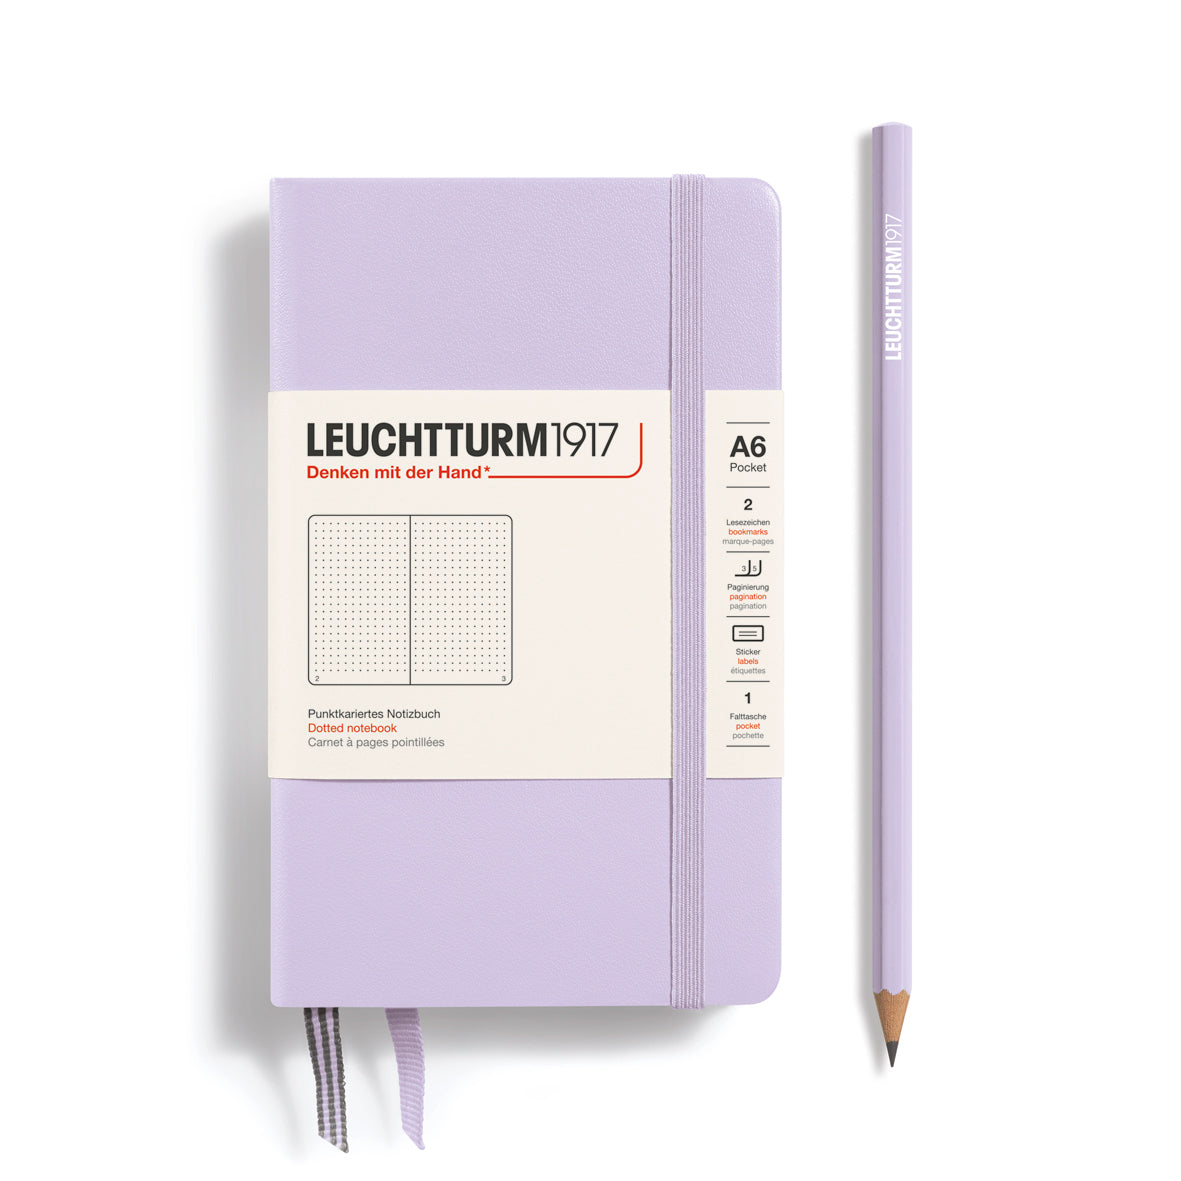 Leuchtturm1917 Notebook A6 Pocket Hardcover in lilac by Penny Black - dotted ruling